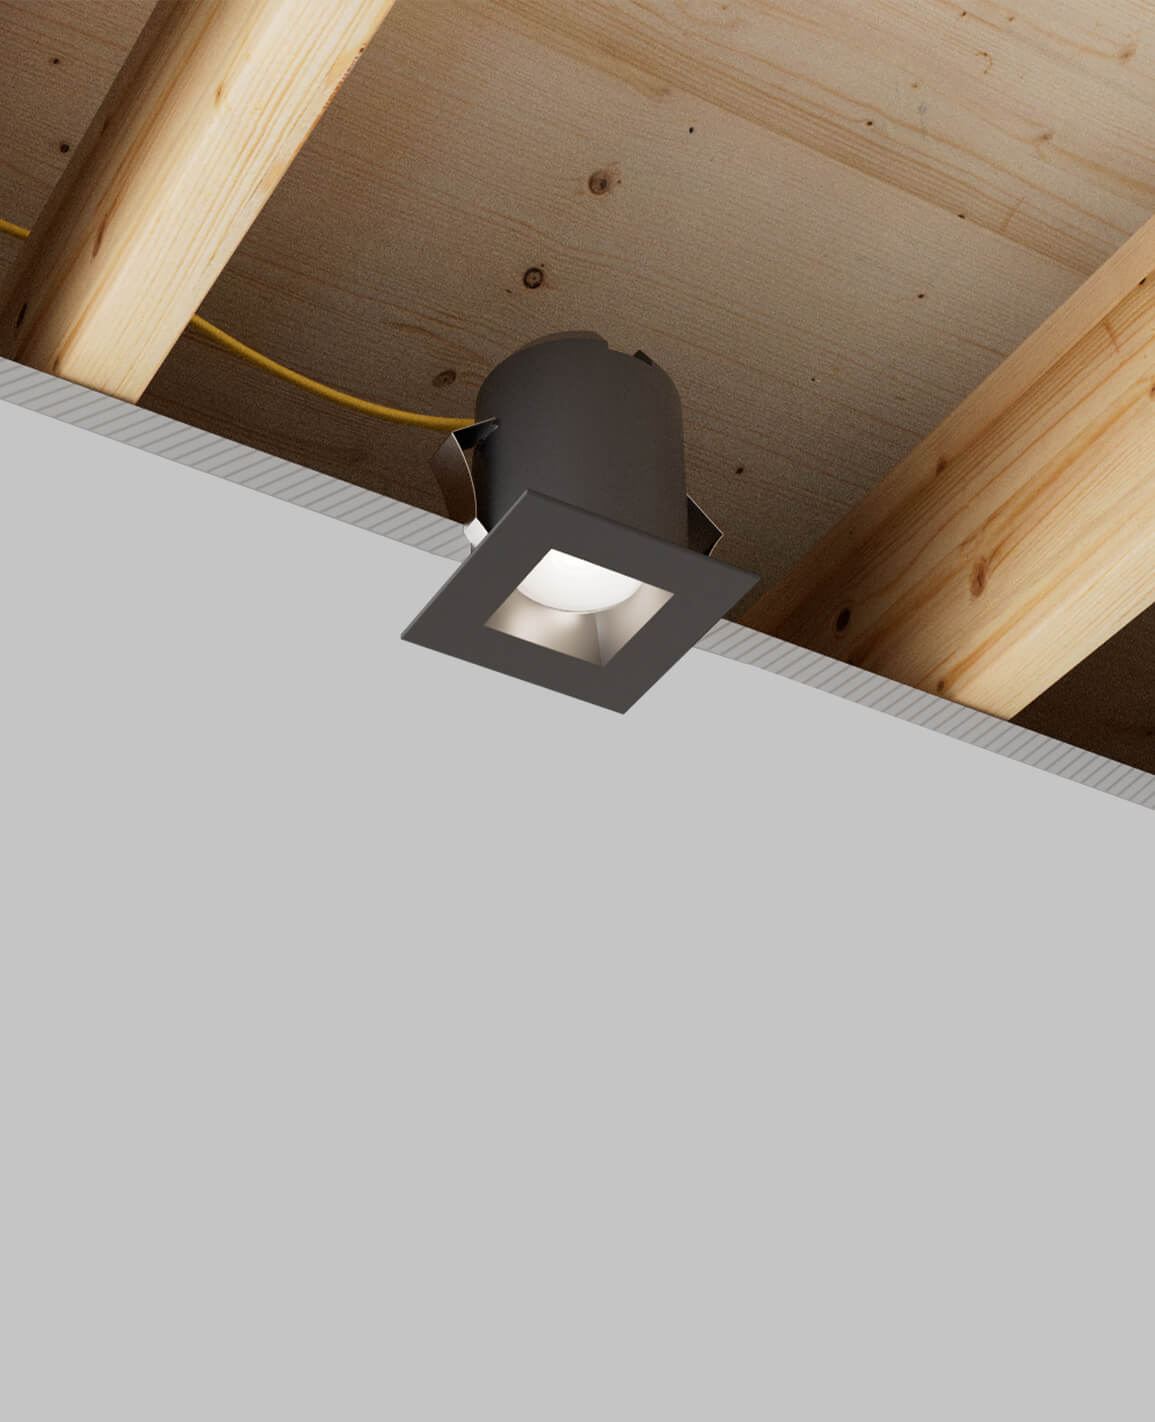 3" LUSA recessed light with remodel housing and black square trim